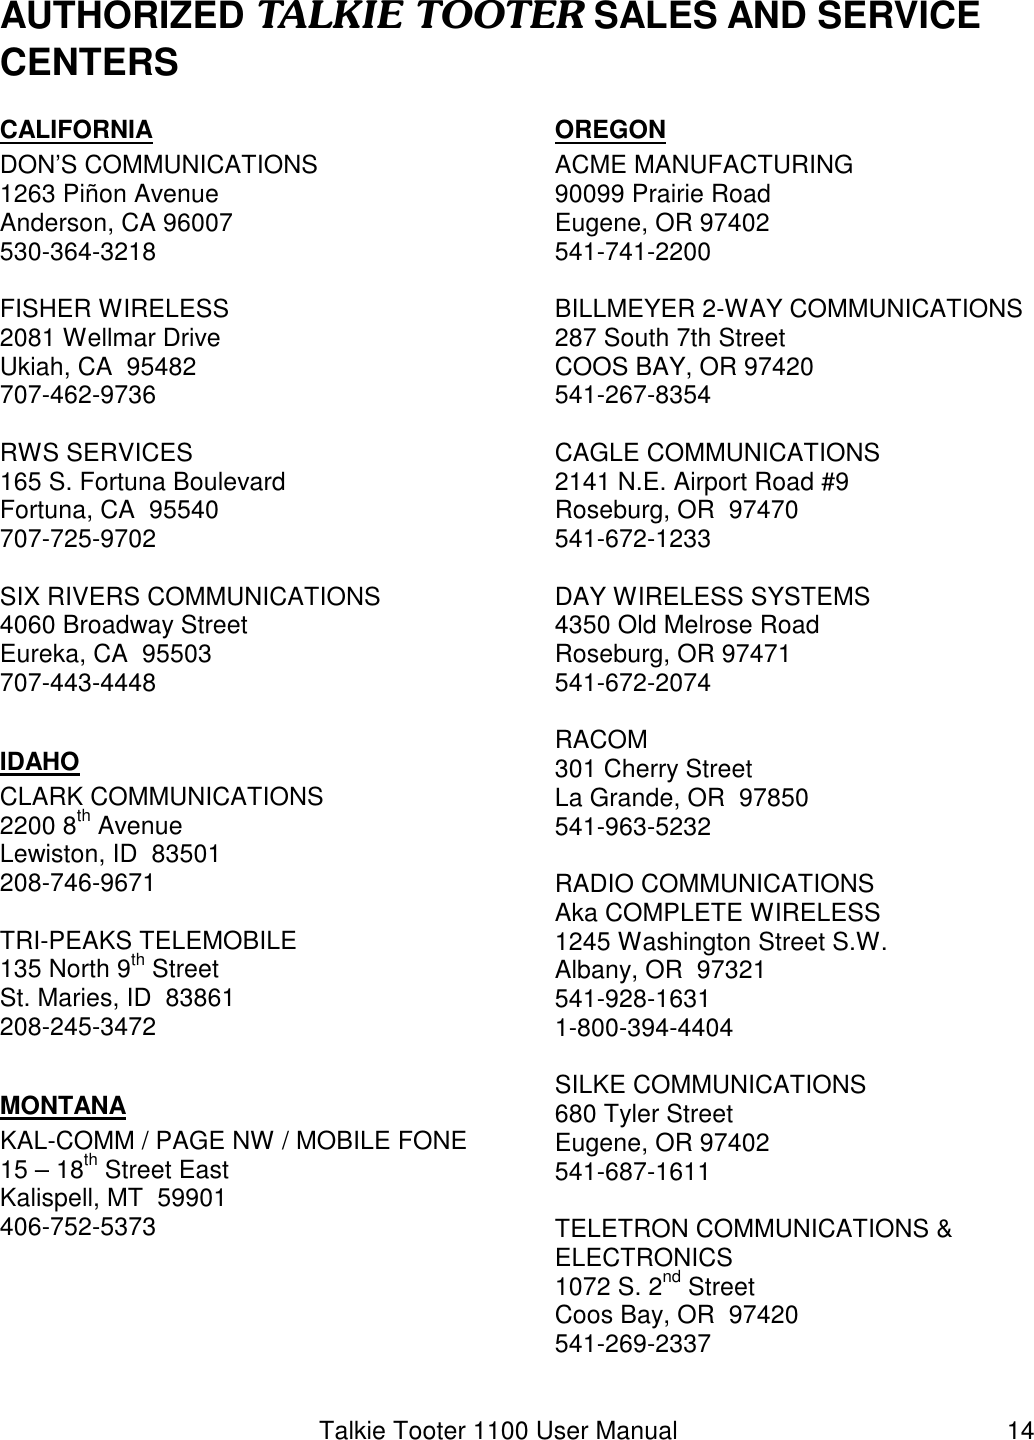 Talkie Tooter 1100 User Manual  14 AUTHORIZED TALKIE TOOTER SALES AND SERVICE CENTERSCALIFORNIA DON’S COMMUNICATIONS 1263 Piñon Avenue Anderson, CA 96007 530-364-3218  FISHER WIRELESS 2081 Wellmar Drive Ukiah, CA  95482 707-462-9736  RWS SERVICES 165 S. Fortuna Boulevard Fortuna, CA  95540 707-725-9702  SIX RIVERS COMMUNICATIONS 4060 Broadway Street Eureka, CA  95503 707-443-4448  IDAHO CLARK COMMUNICATIONS 2200 8th Avenue Lewiston, ID  83501 208-746-9671  TRI-PEAKS TELEMOBILE 135 North 9th Street St. Maries, ID  83861 208-245-3472  MONTANA KAL-COMM / PAGE NW / MOBILE FONE 15 – 18th Street East Kalispell, MT  59901 406-752-5373  OREGON ACME MANUFACTURING 90099 Prairie Road Eugene, OR 97402 541-741-2200  BILLMEYER 2-WAY COMMUNICATIONS 287 South 7th Street COOS BAY, OR 97420 541-267-8354  CAGLE COMMUNICATIONS 2141 N.E. Airport Road #9 Roseburg, OR  97470 541-672-1233  DAY WIRELESS SYSTEMS 4350 Old Melrose Road Roseburg, OR 97471 541-672-2074  RACOM 301 Cherry Street La Grande, OR  97850 541-963-5232  RADIO COMMUNICATIONS Aka COMPLETE WIRELESS 1245 Washington Street S.W. Albany, OR  97321 541-928-1631 1-800-394-4404  SILKE COMMUNICATIONS 680 Tyler Street Eugene, OR 97402 541-687-1611  TELETRON COMMUNICATIONS &amp;  ELECTRONICS 1072 S. 2nd Street Coos Bay, OR  97420 541-269-2337  